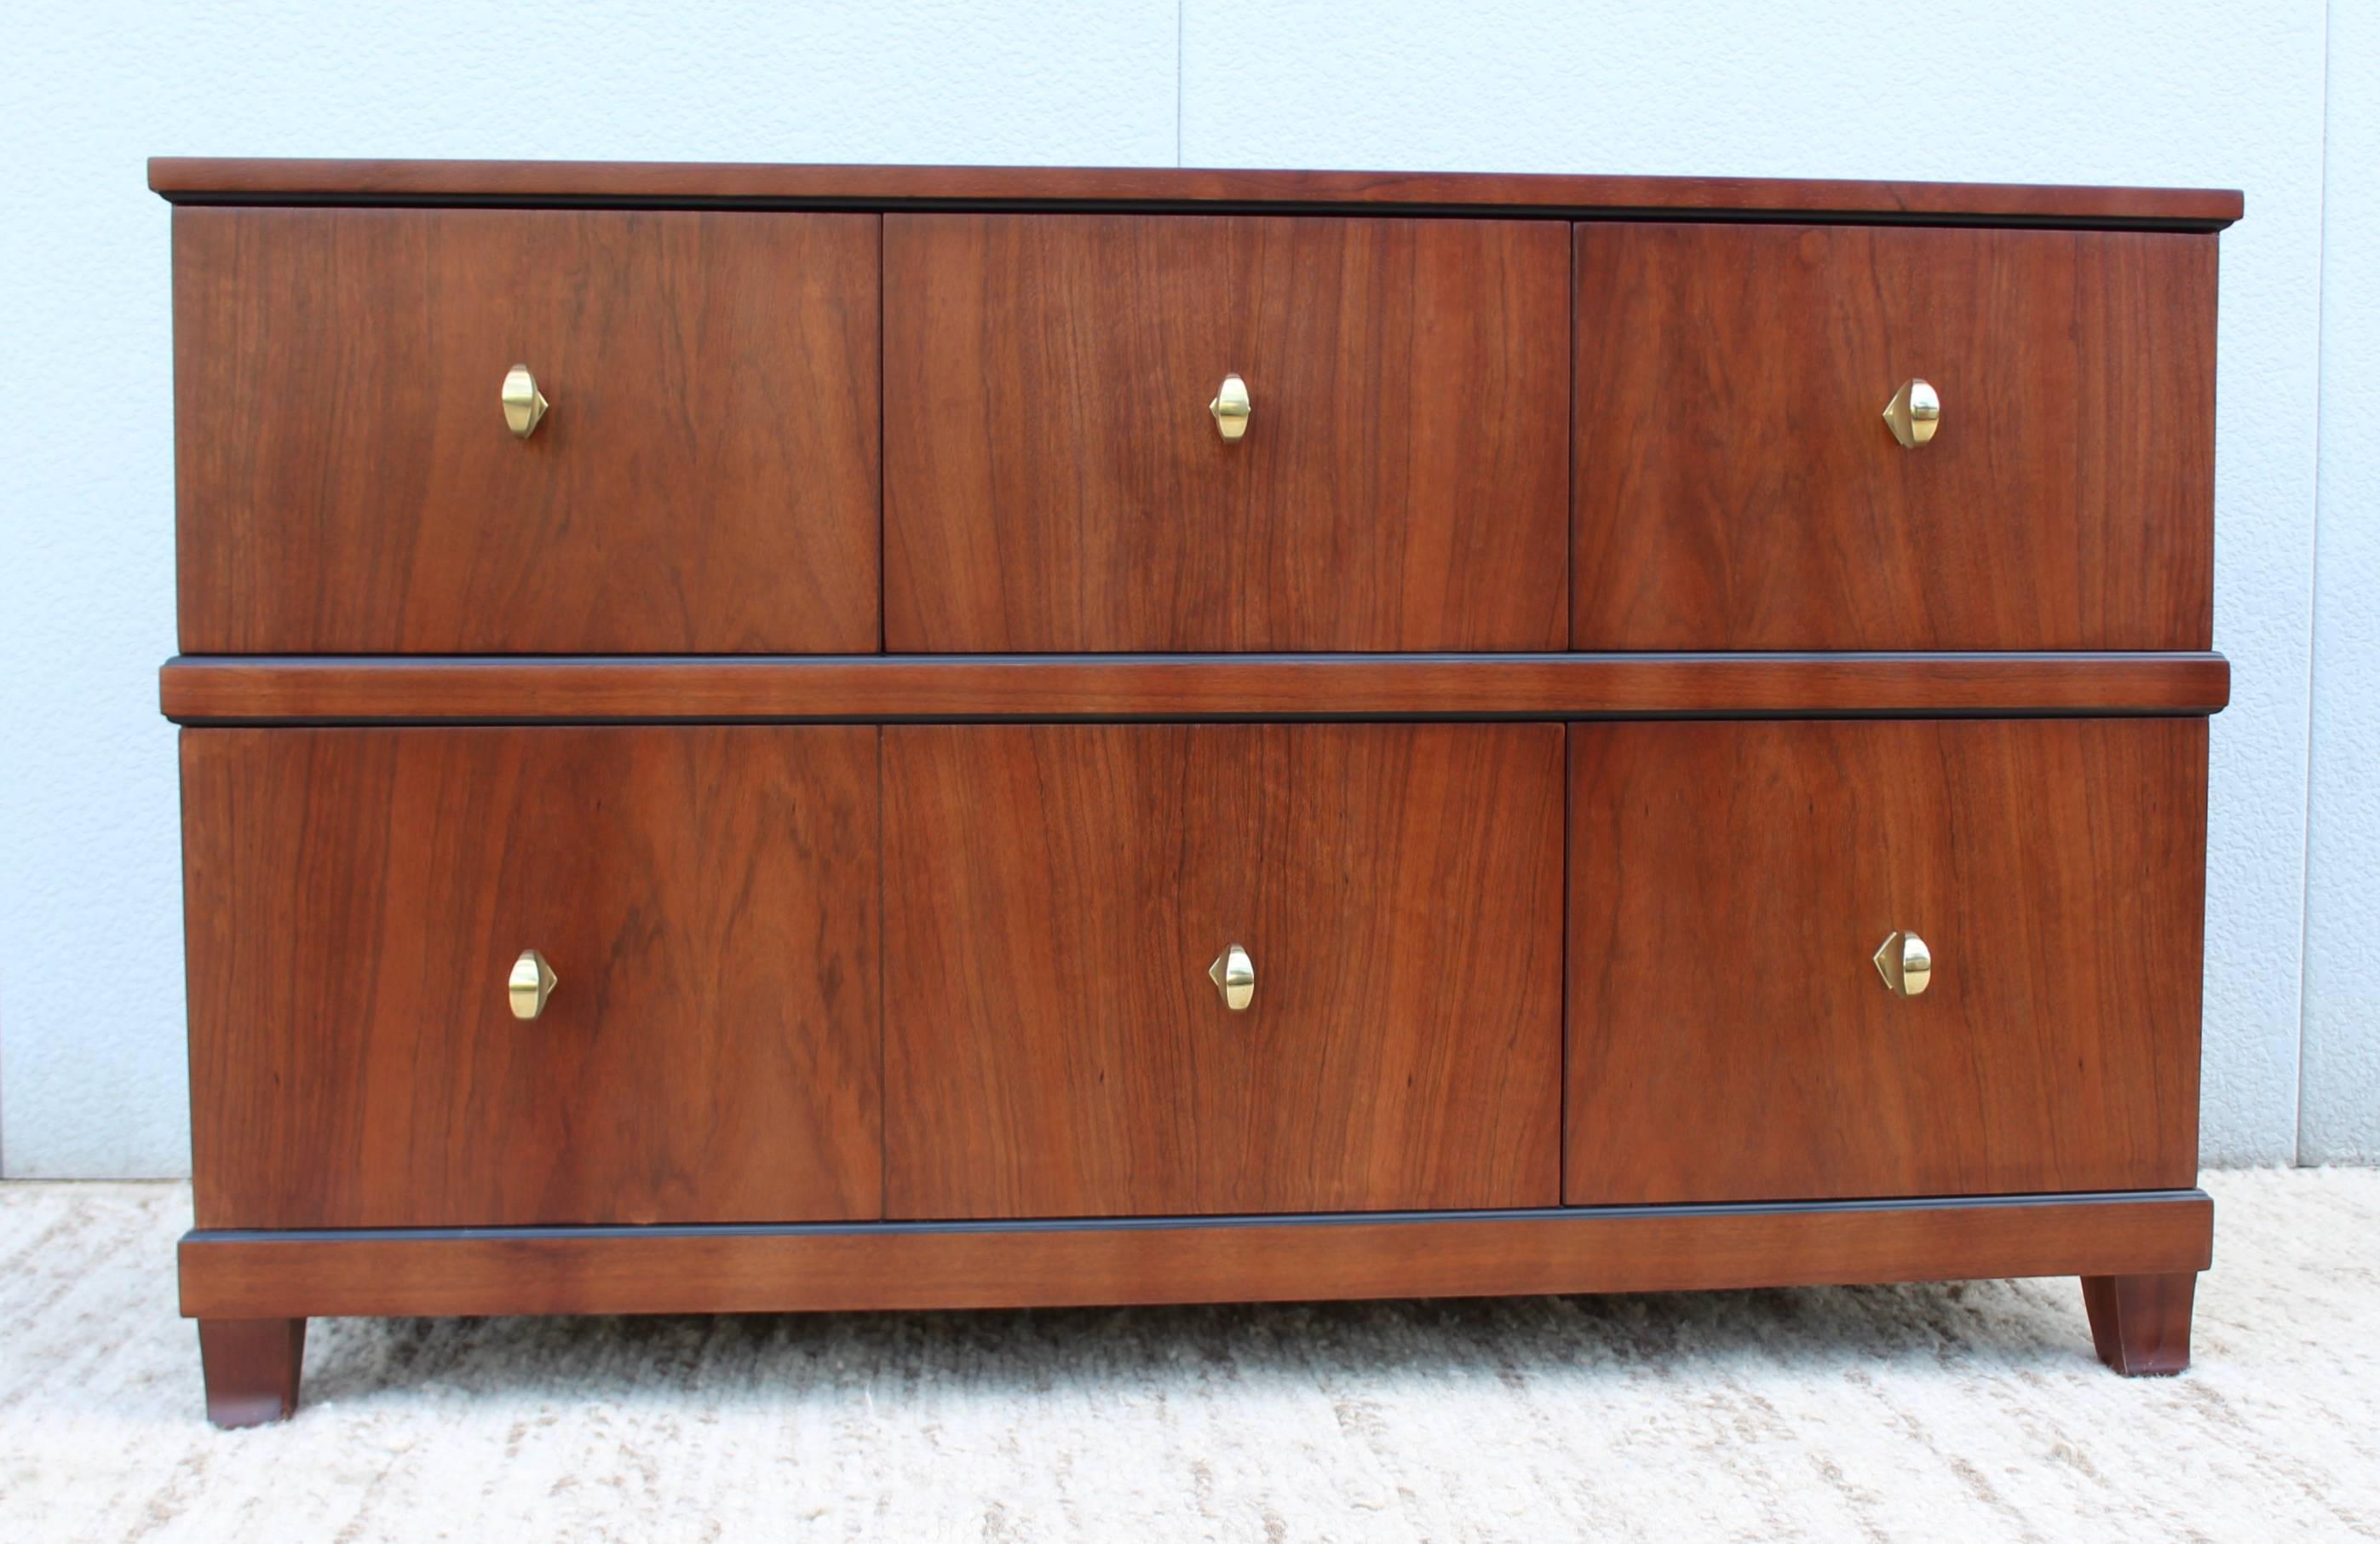 Rare 1940s custom order Paldao wood five-drawer dresser designed by Gilbert Rohde for Herman Miller. With brass hardware newly refinished.

Matching tall dresser is available.